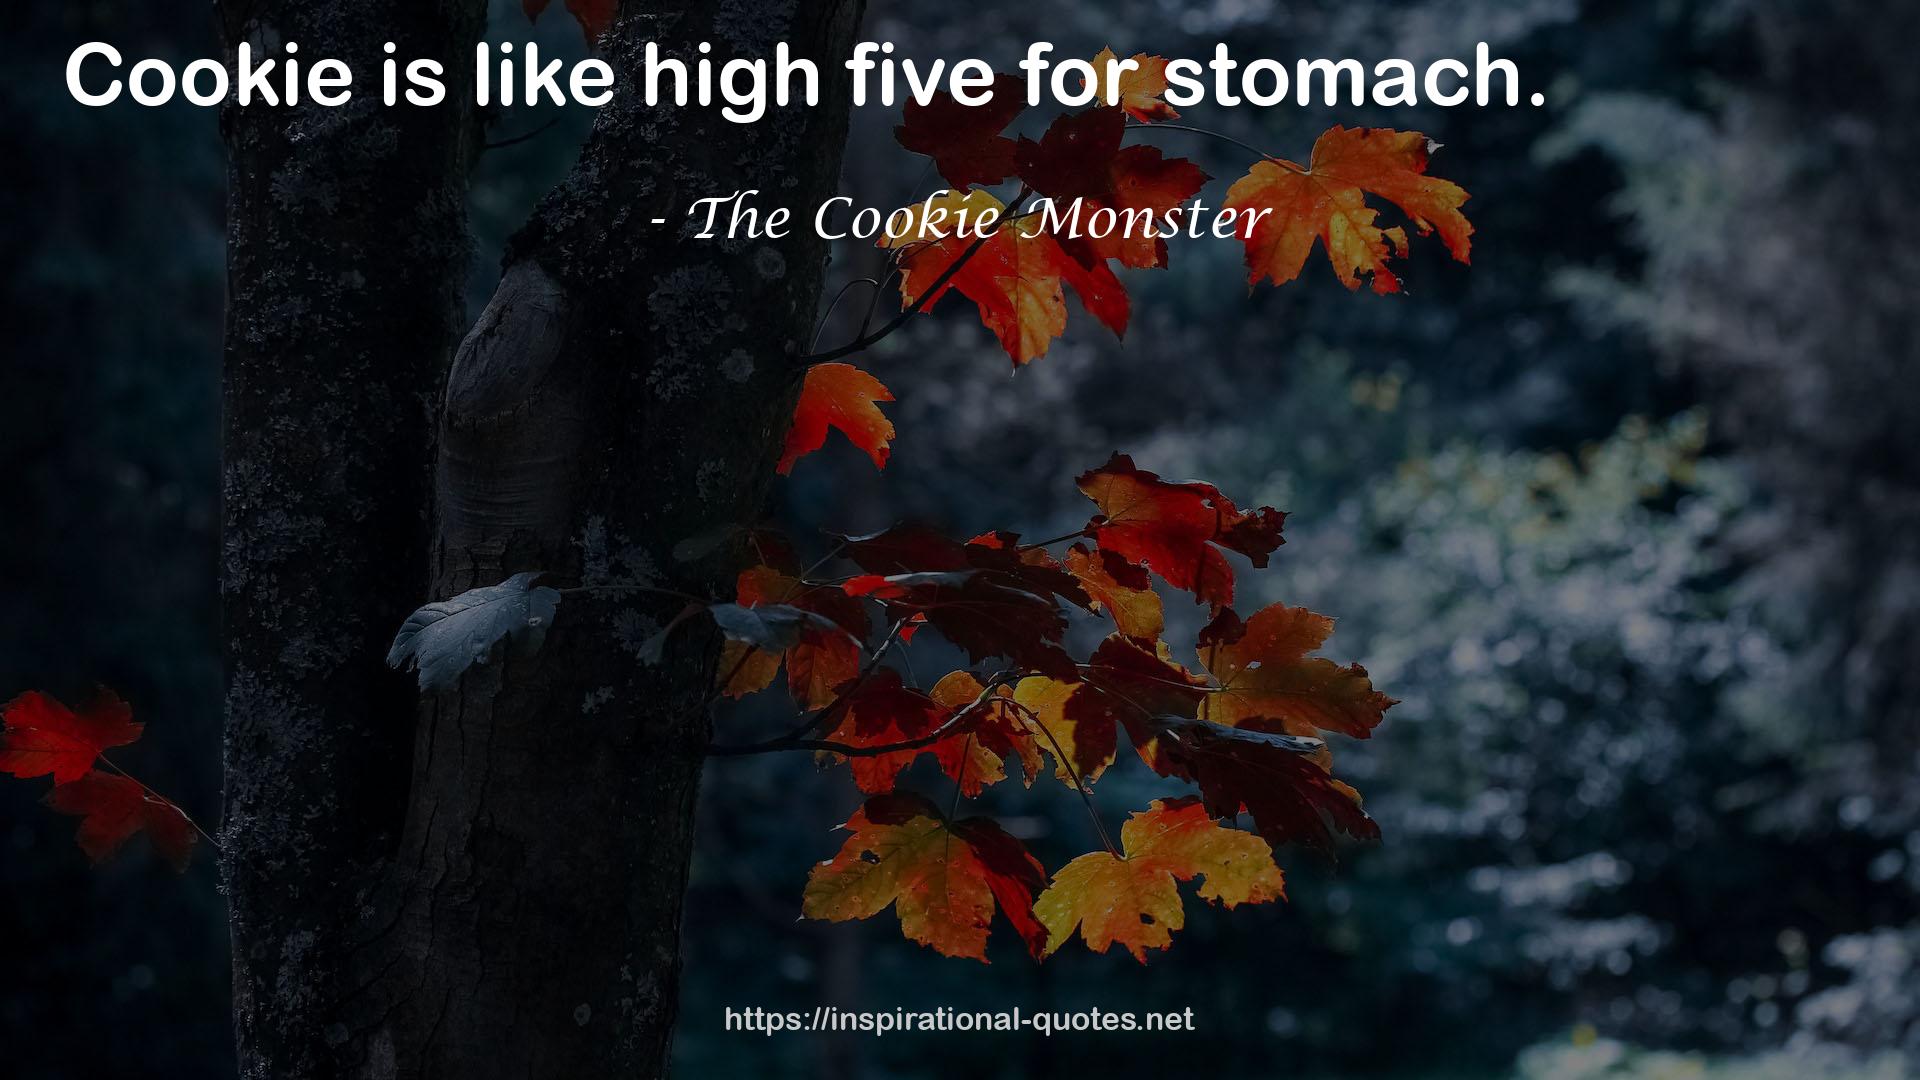 The Cookie Monster QUOTES